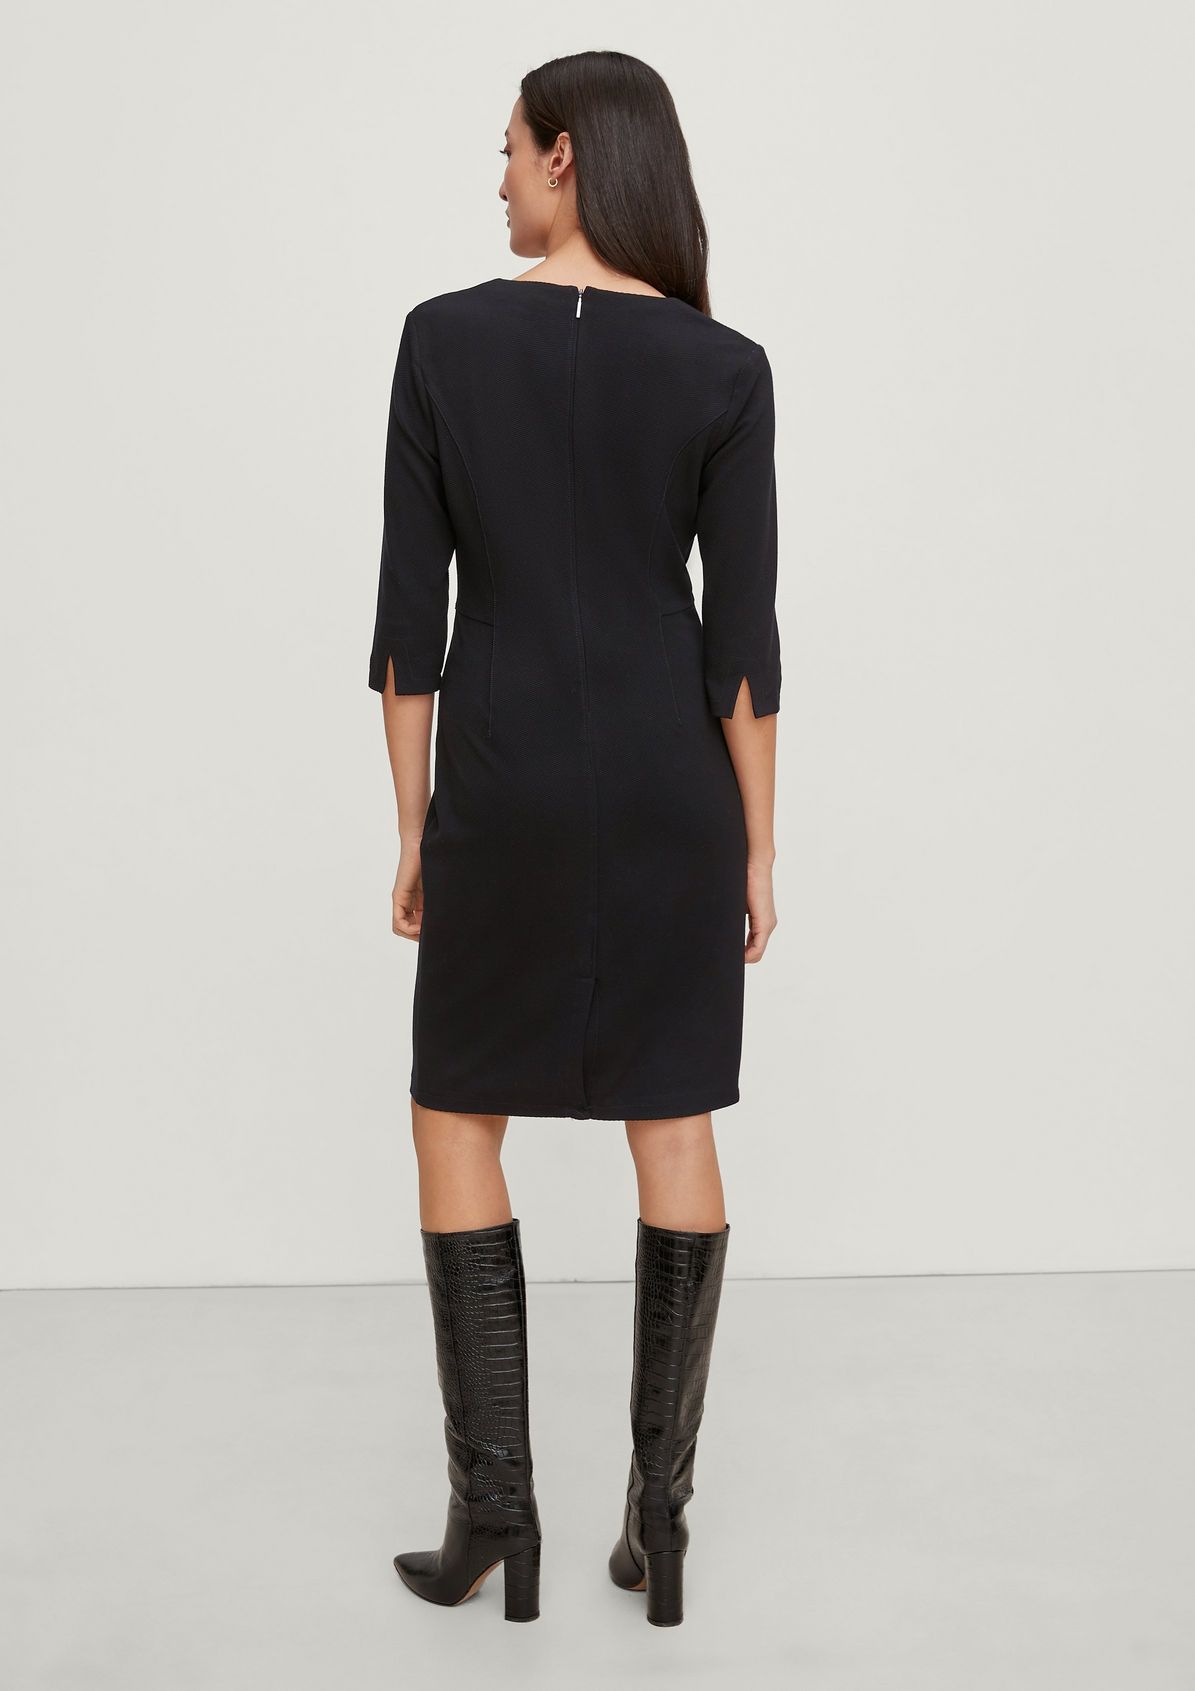 Midi dress with 3/4-length sleeves from comma